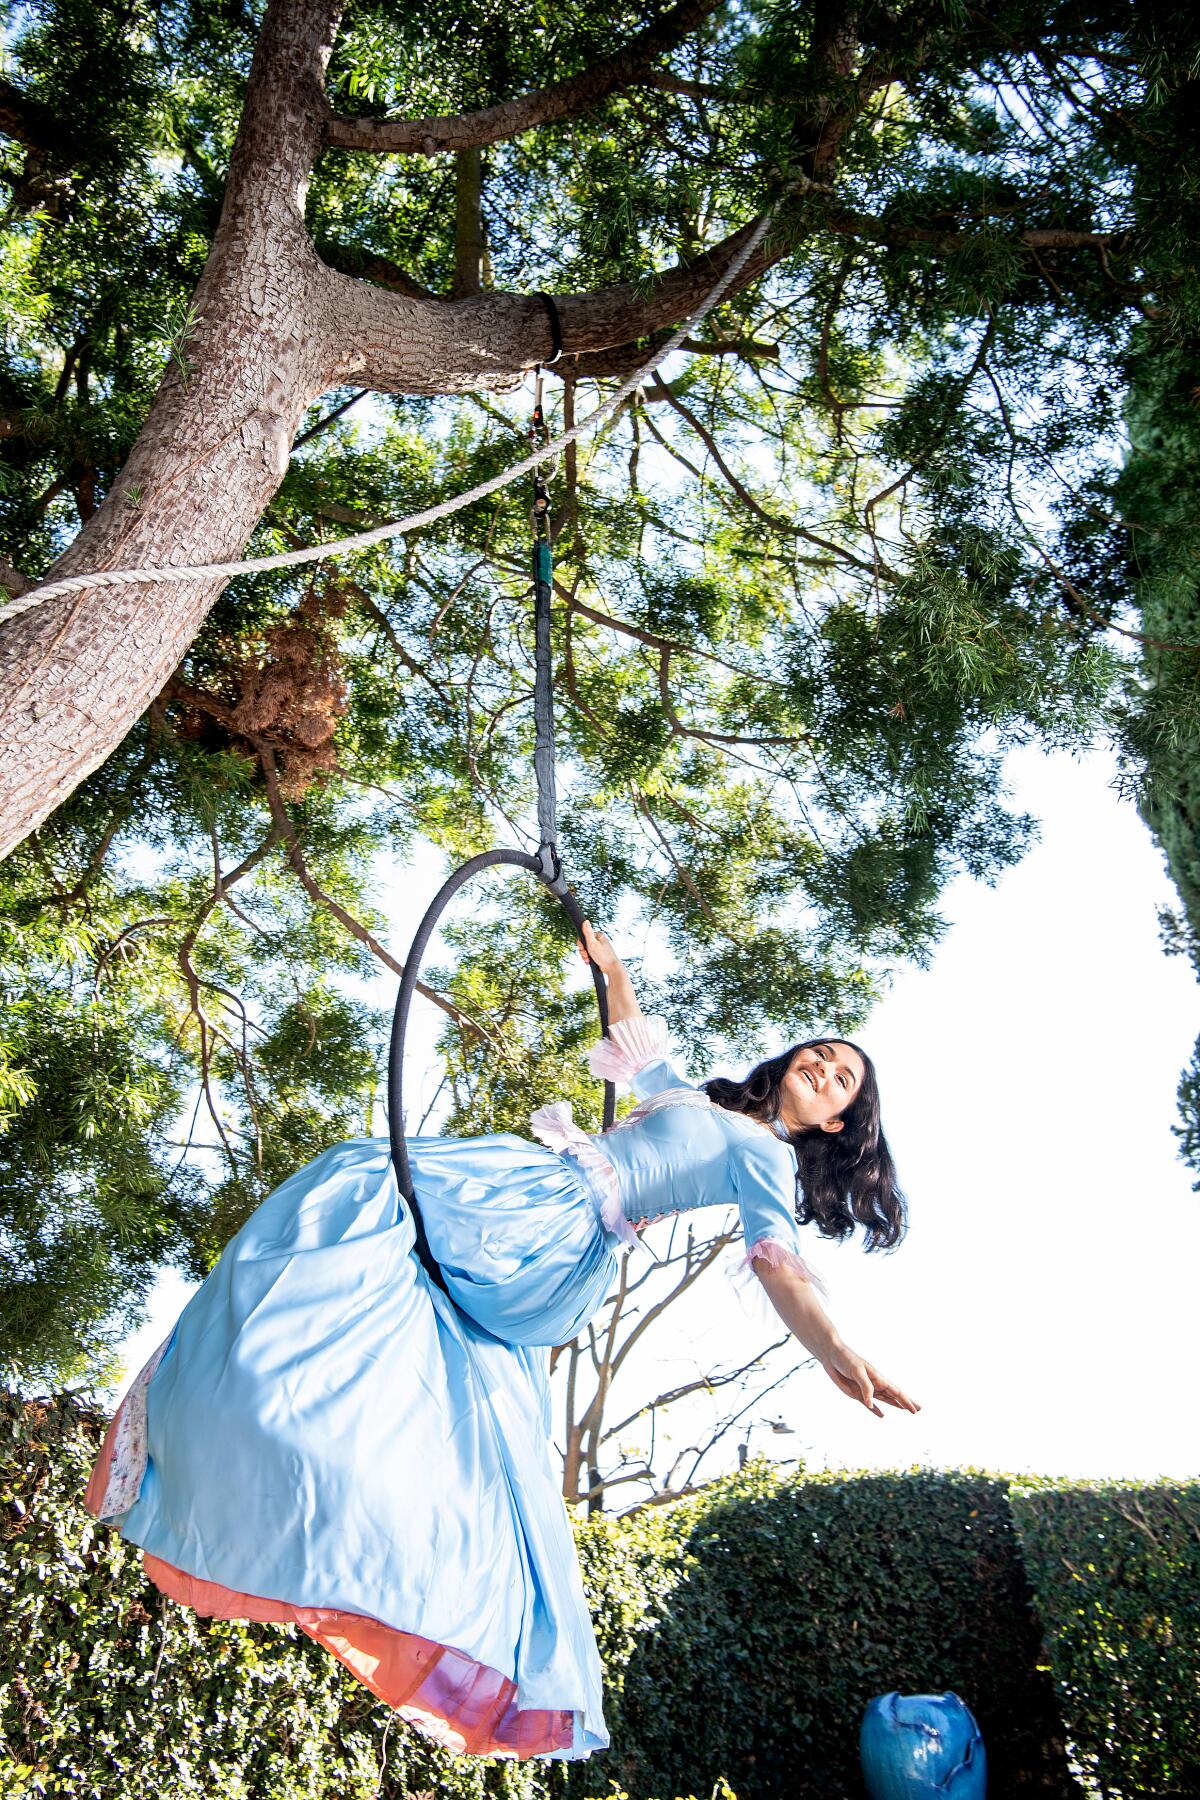 Rose, in a baby blue gown, sits on an aerial hoop, leaning back and hanging on with one hand.